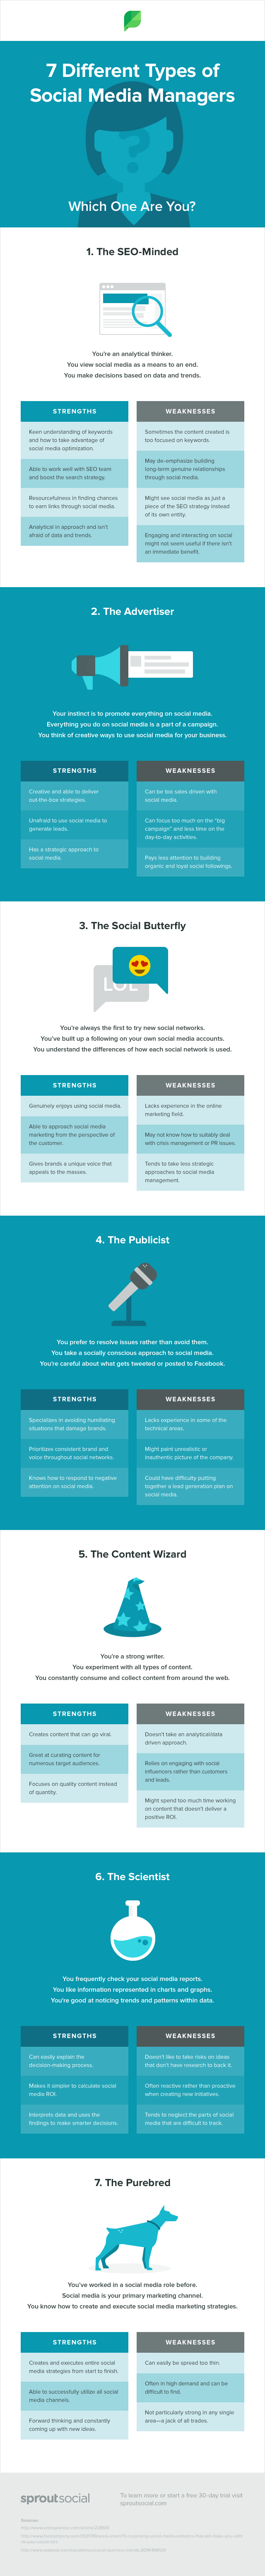 The 7 Different Types Of Social Media Managers